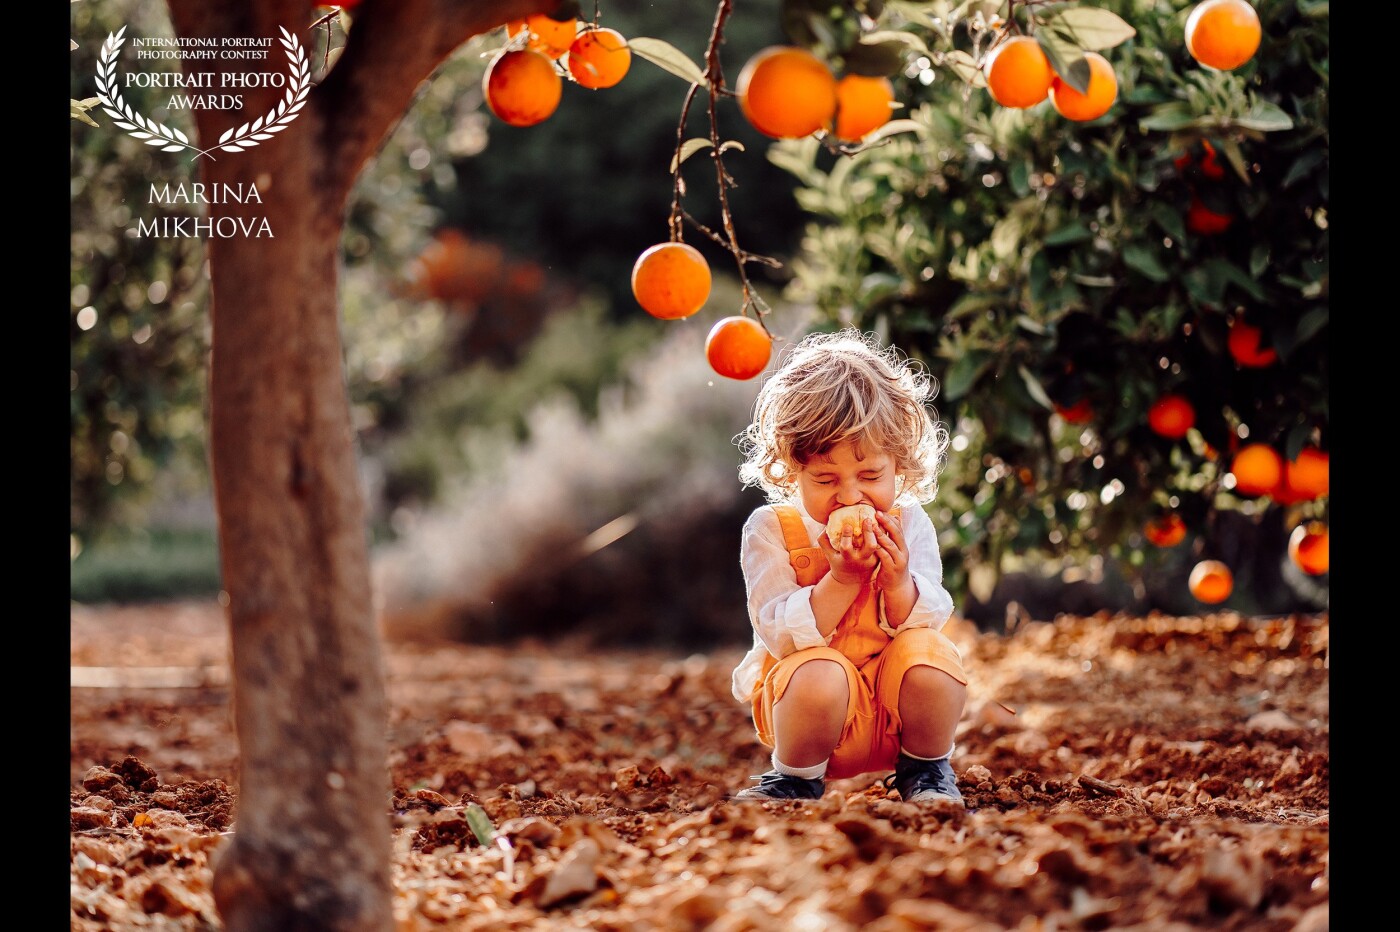 What a joy to try fresh oranges directly from the tree! It was not planned to eat them but eventually, it became the best part of the shooting.